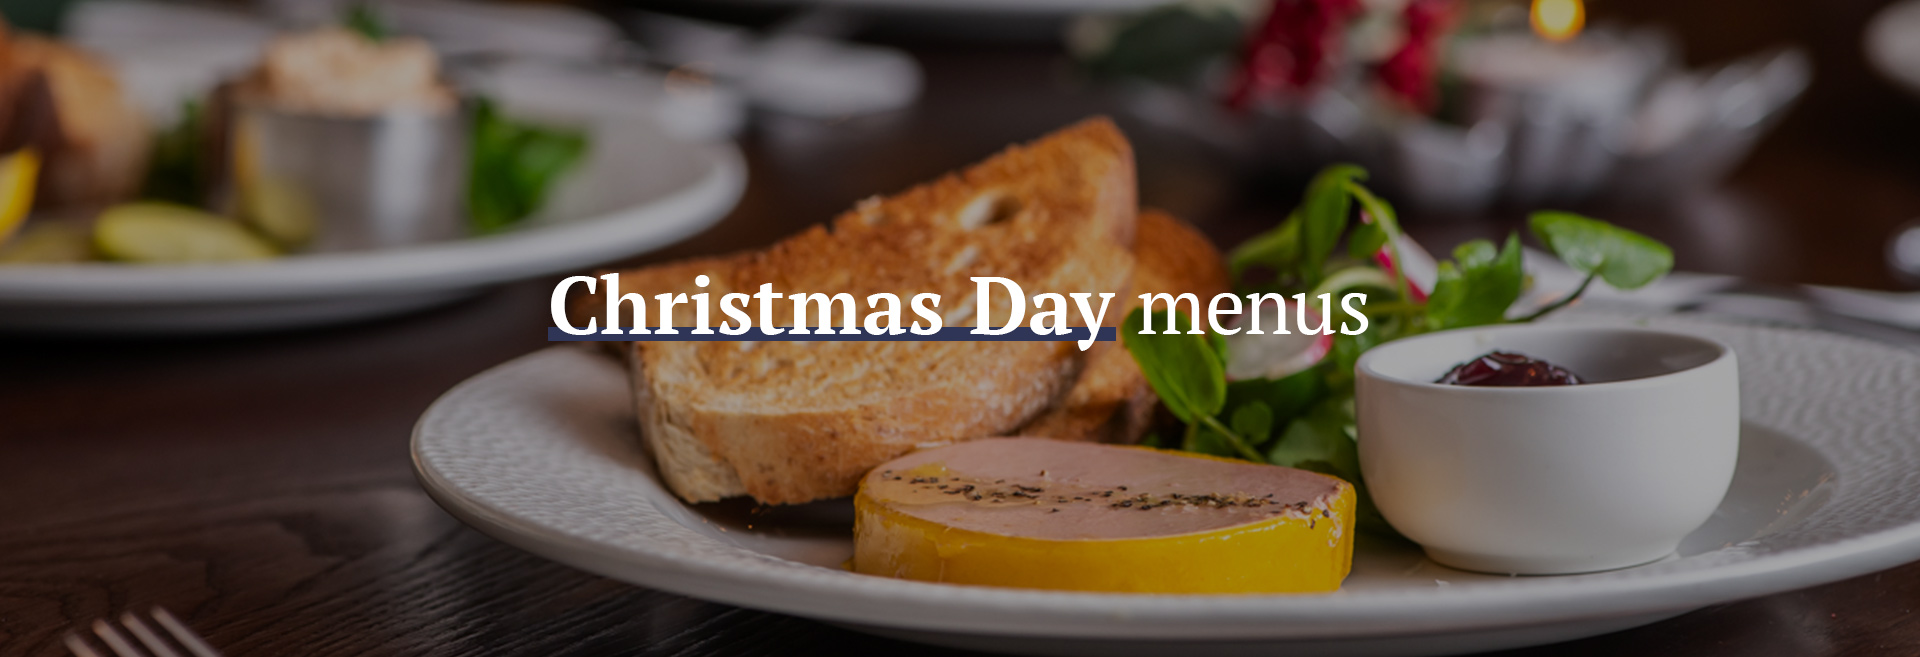 Christmas Day Menu at The Crown and Anchor Chiswick